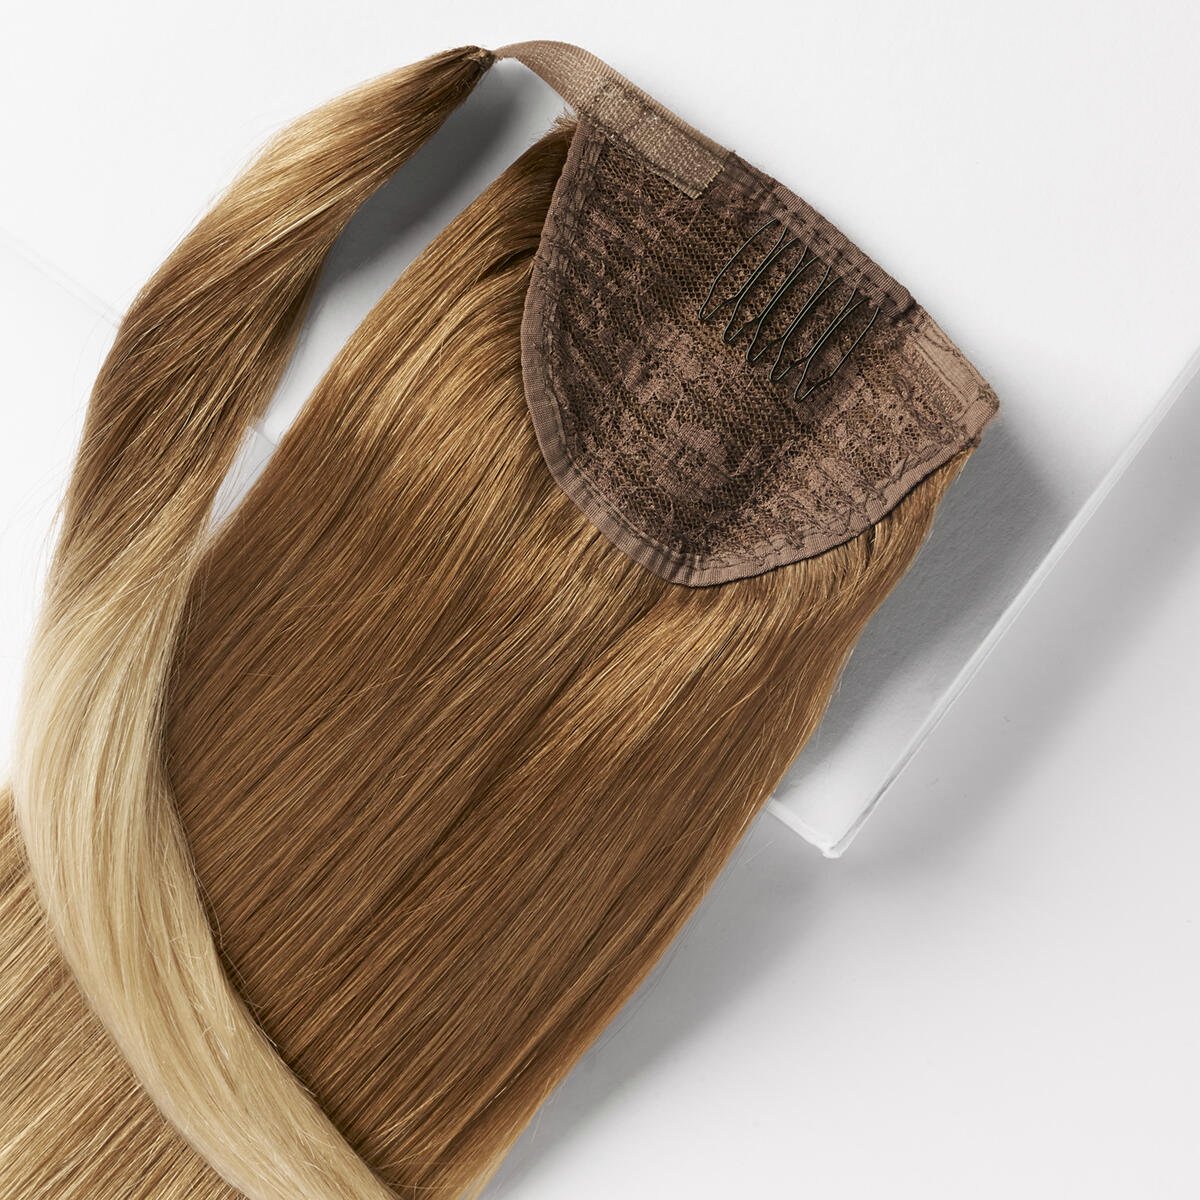 Clip-in Ponytail O5.1/10.8 Medium Ash Blond Ombre 50 cm